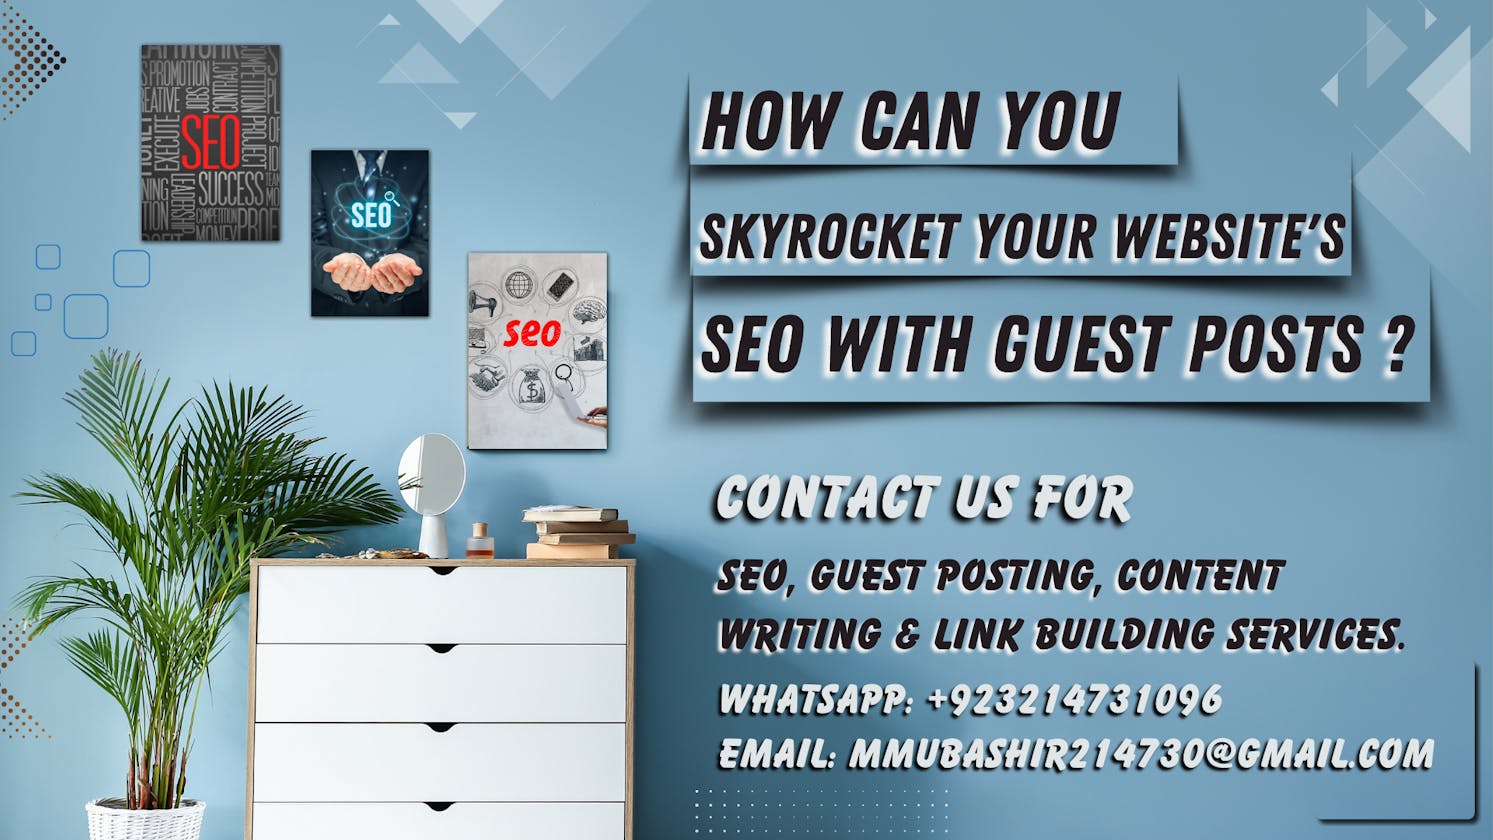 How can you skyrocket your website's SEO with guest posts?